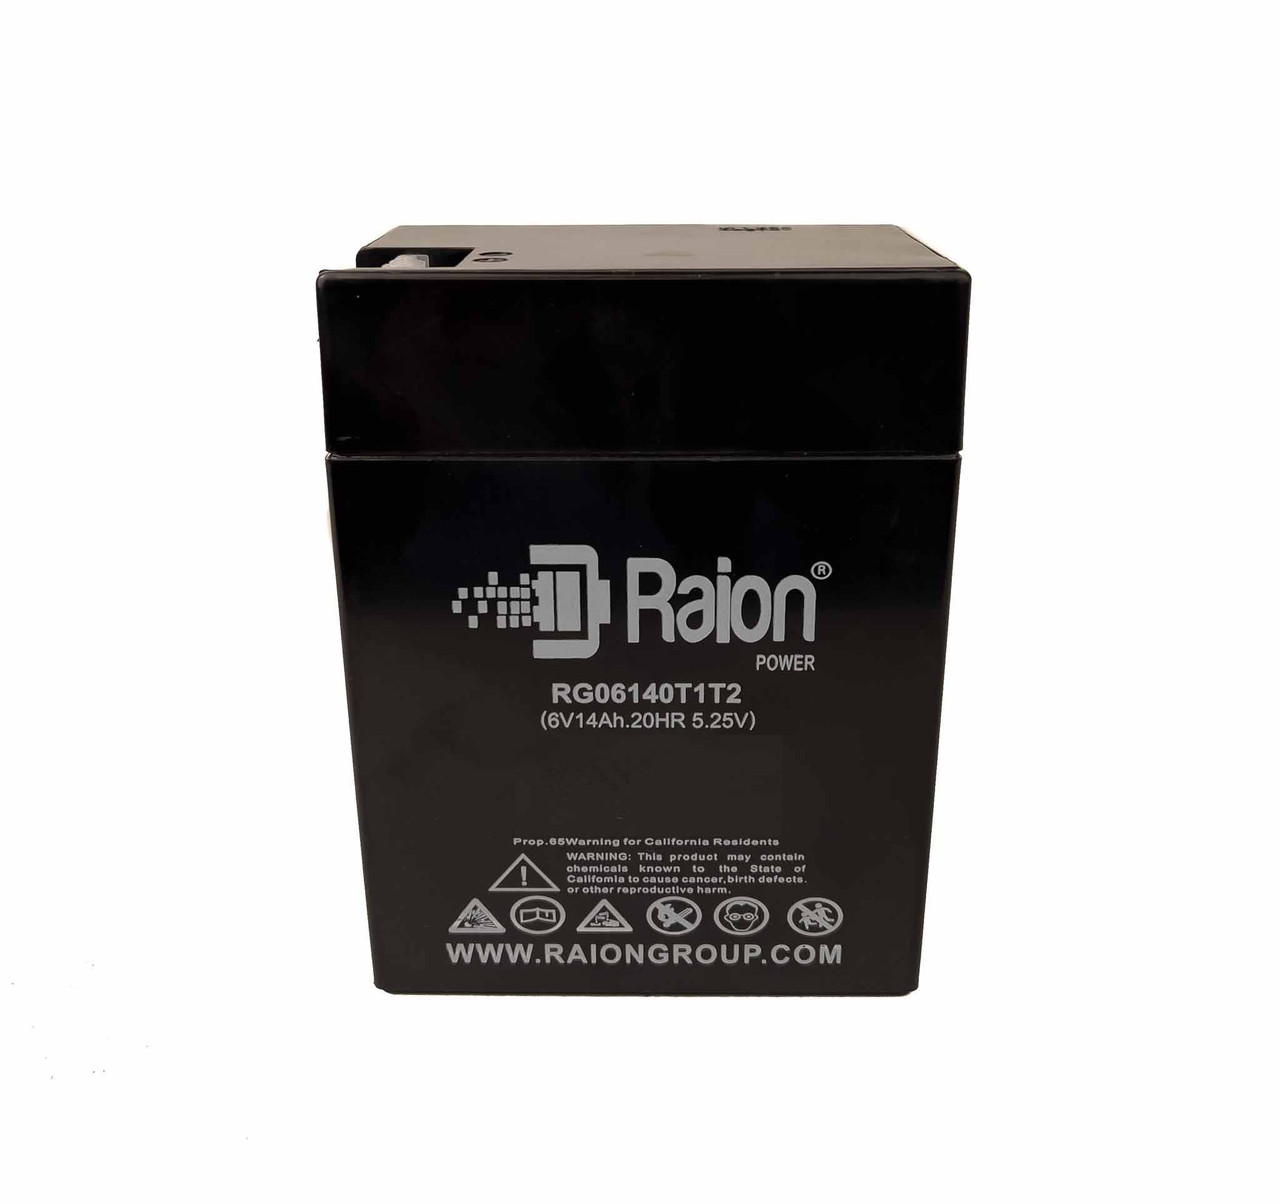 Raion Power RG06140T1T2 6V 14Ah Replacement T1T2 Battery Terminals for Cycle Sound Raider 550 (Japan) 74536-9563